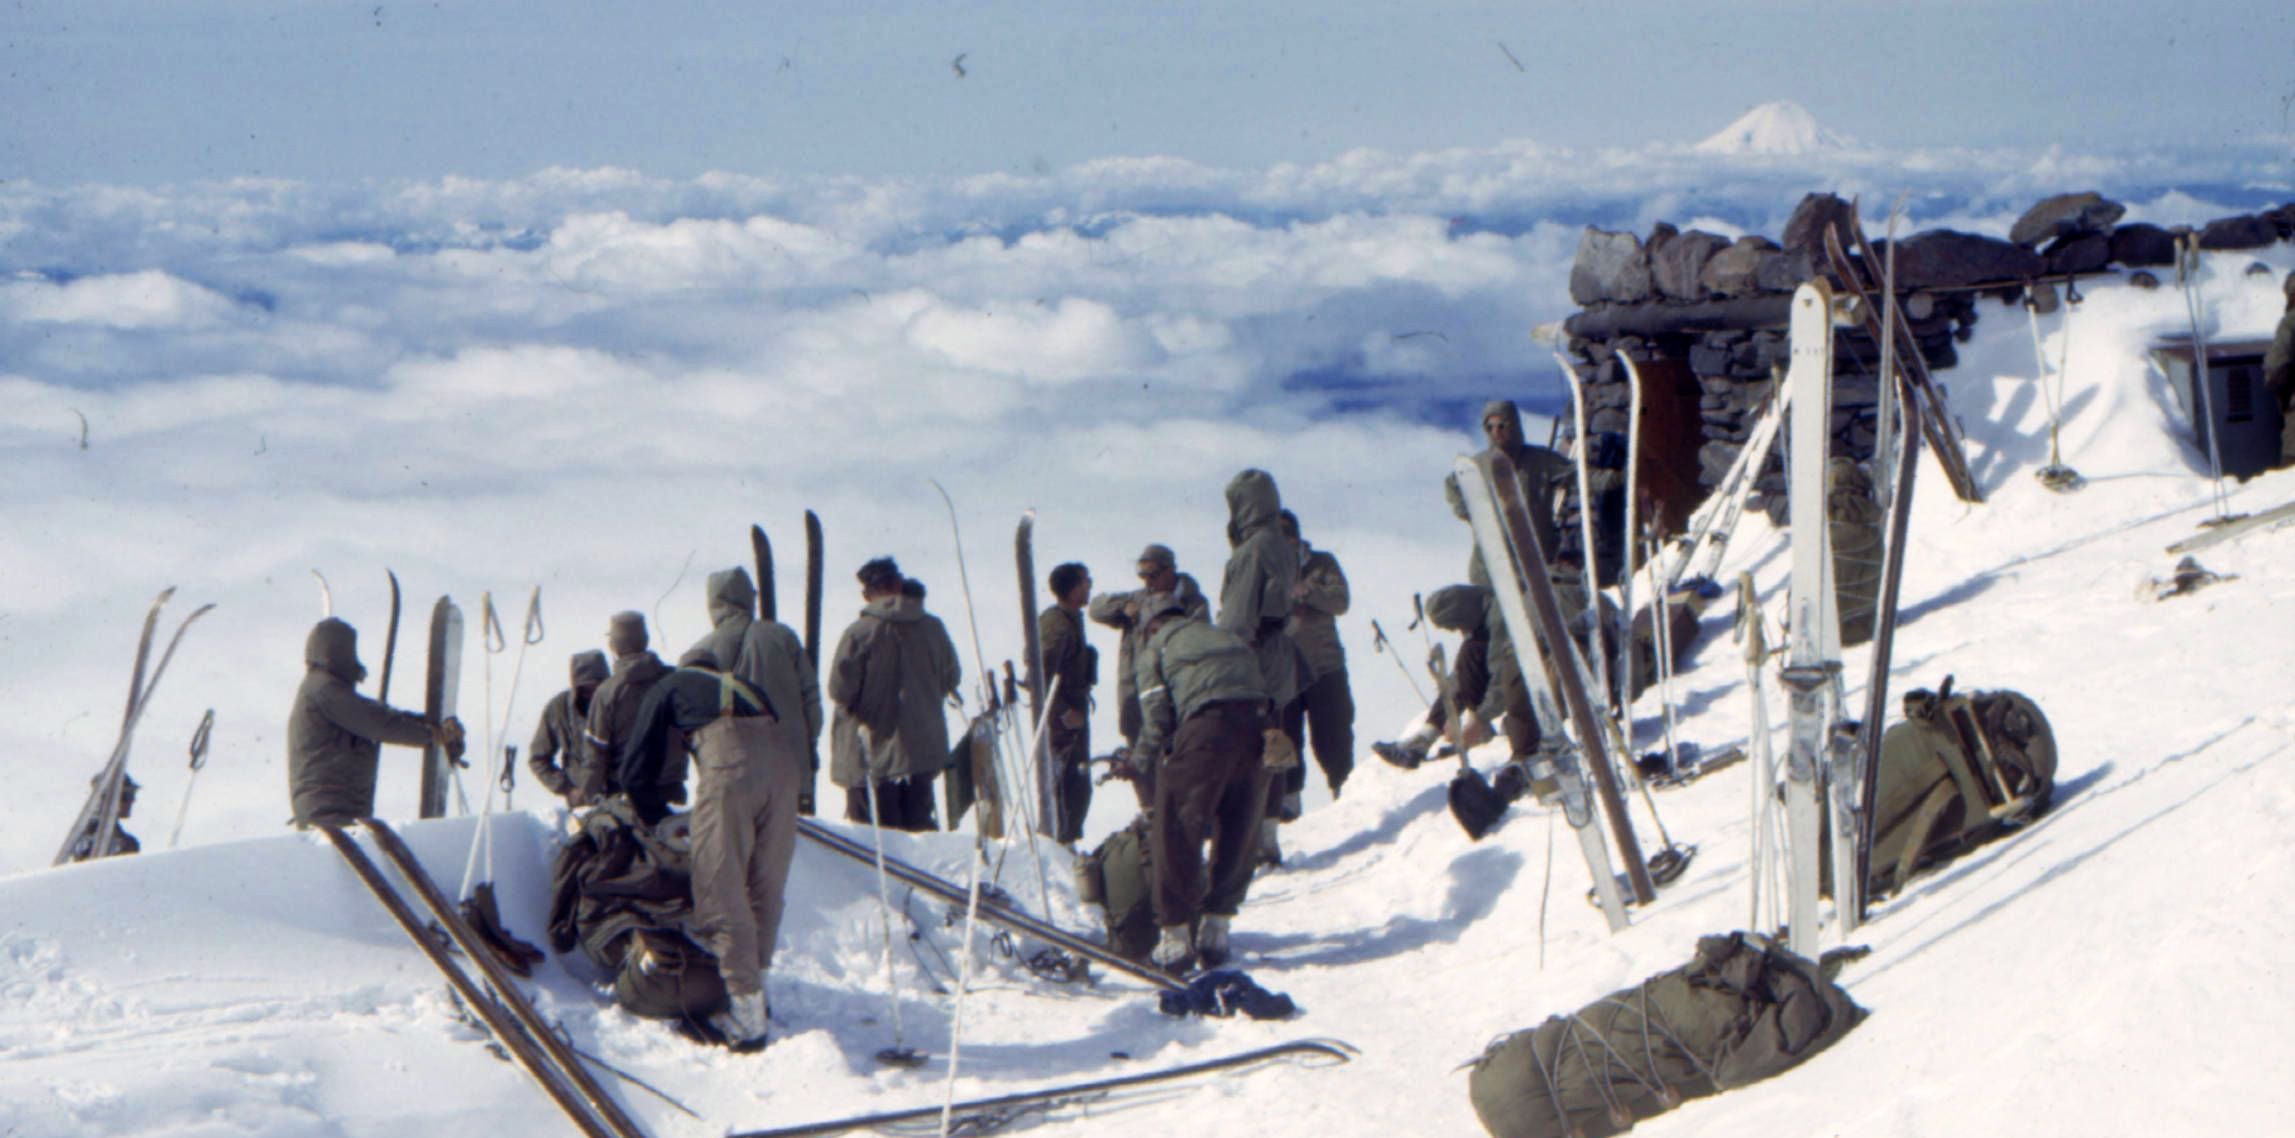 Recruits in the 10th Mountain Division learned mountain survival in the Colorado mountains.